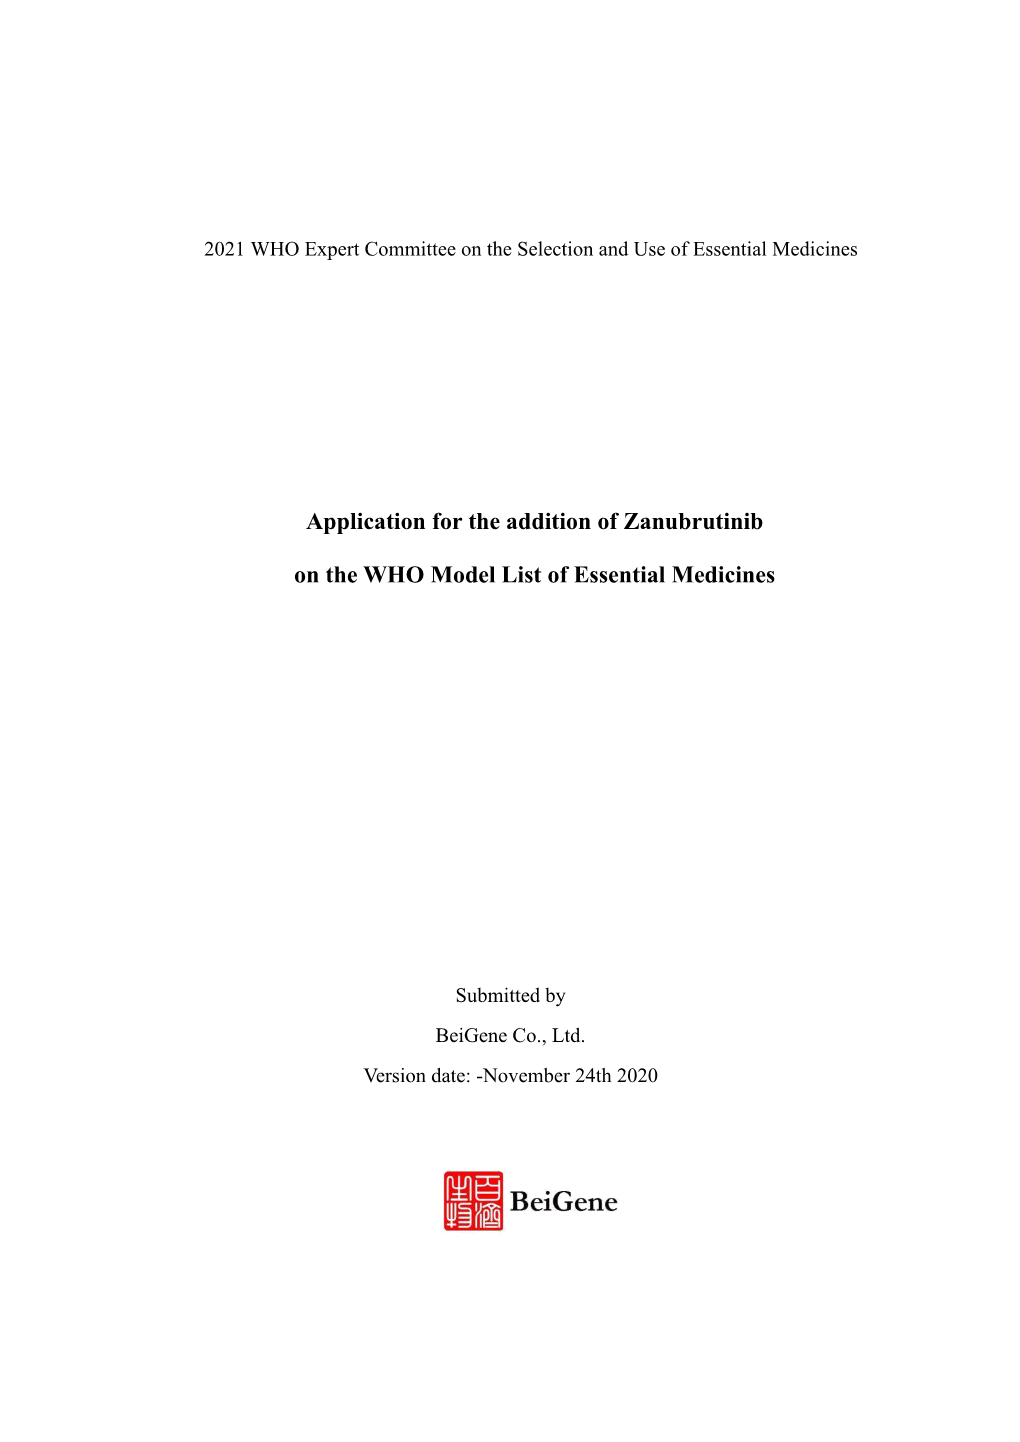 Application for the Addition of Zanubrutinib on the WHO Model List of Essential Medicines